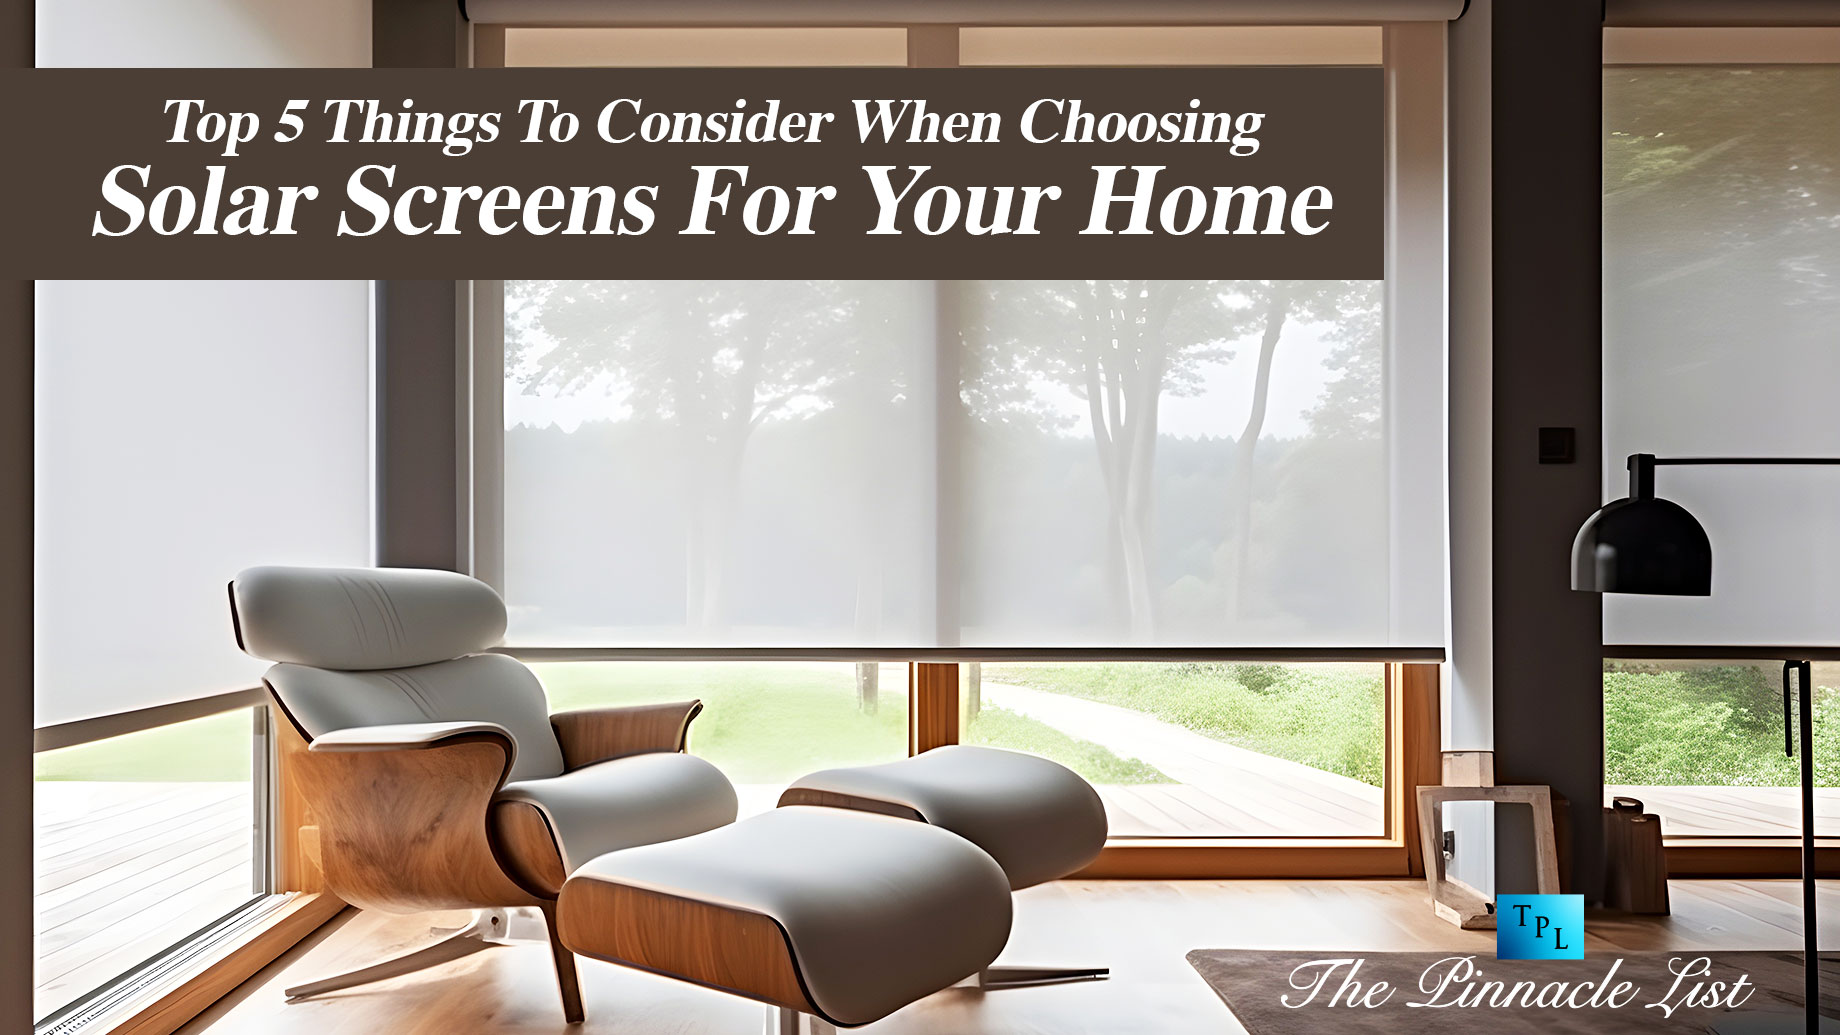 Top 5 Things To Consider When Choosing Solar Screens For Your Home